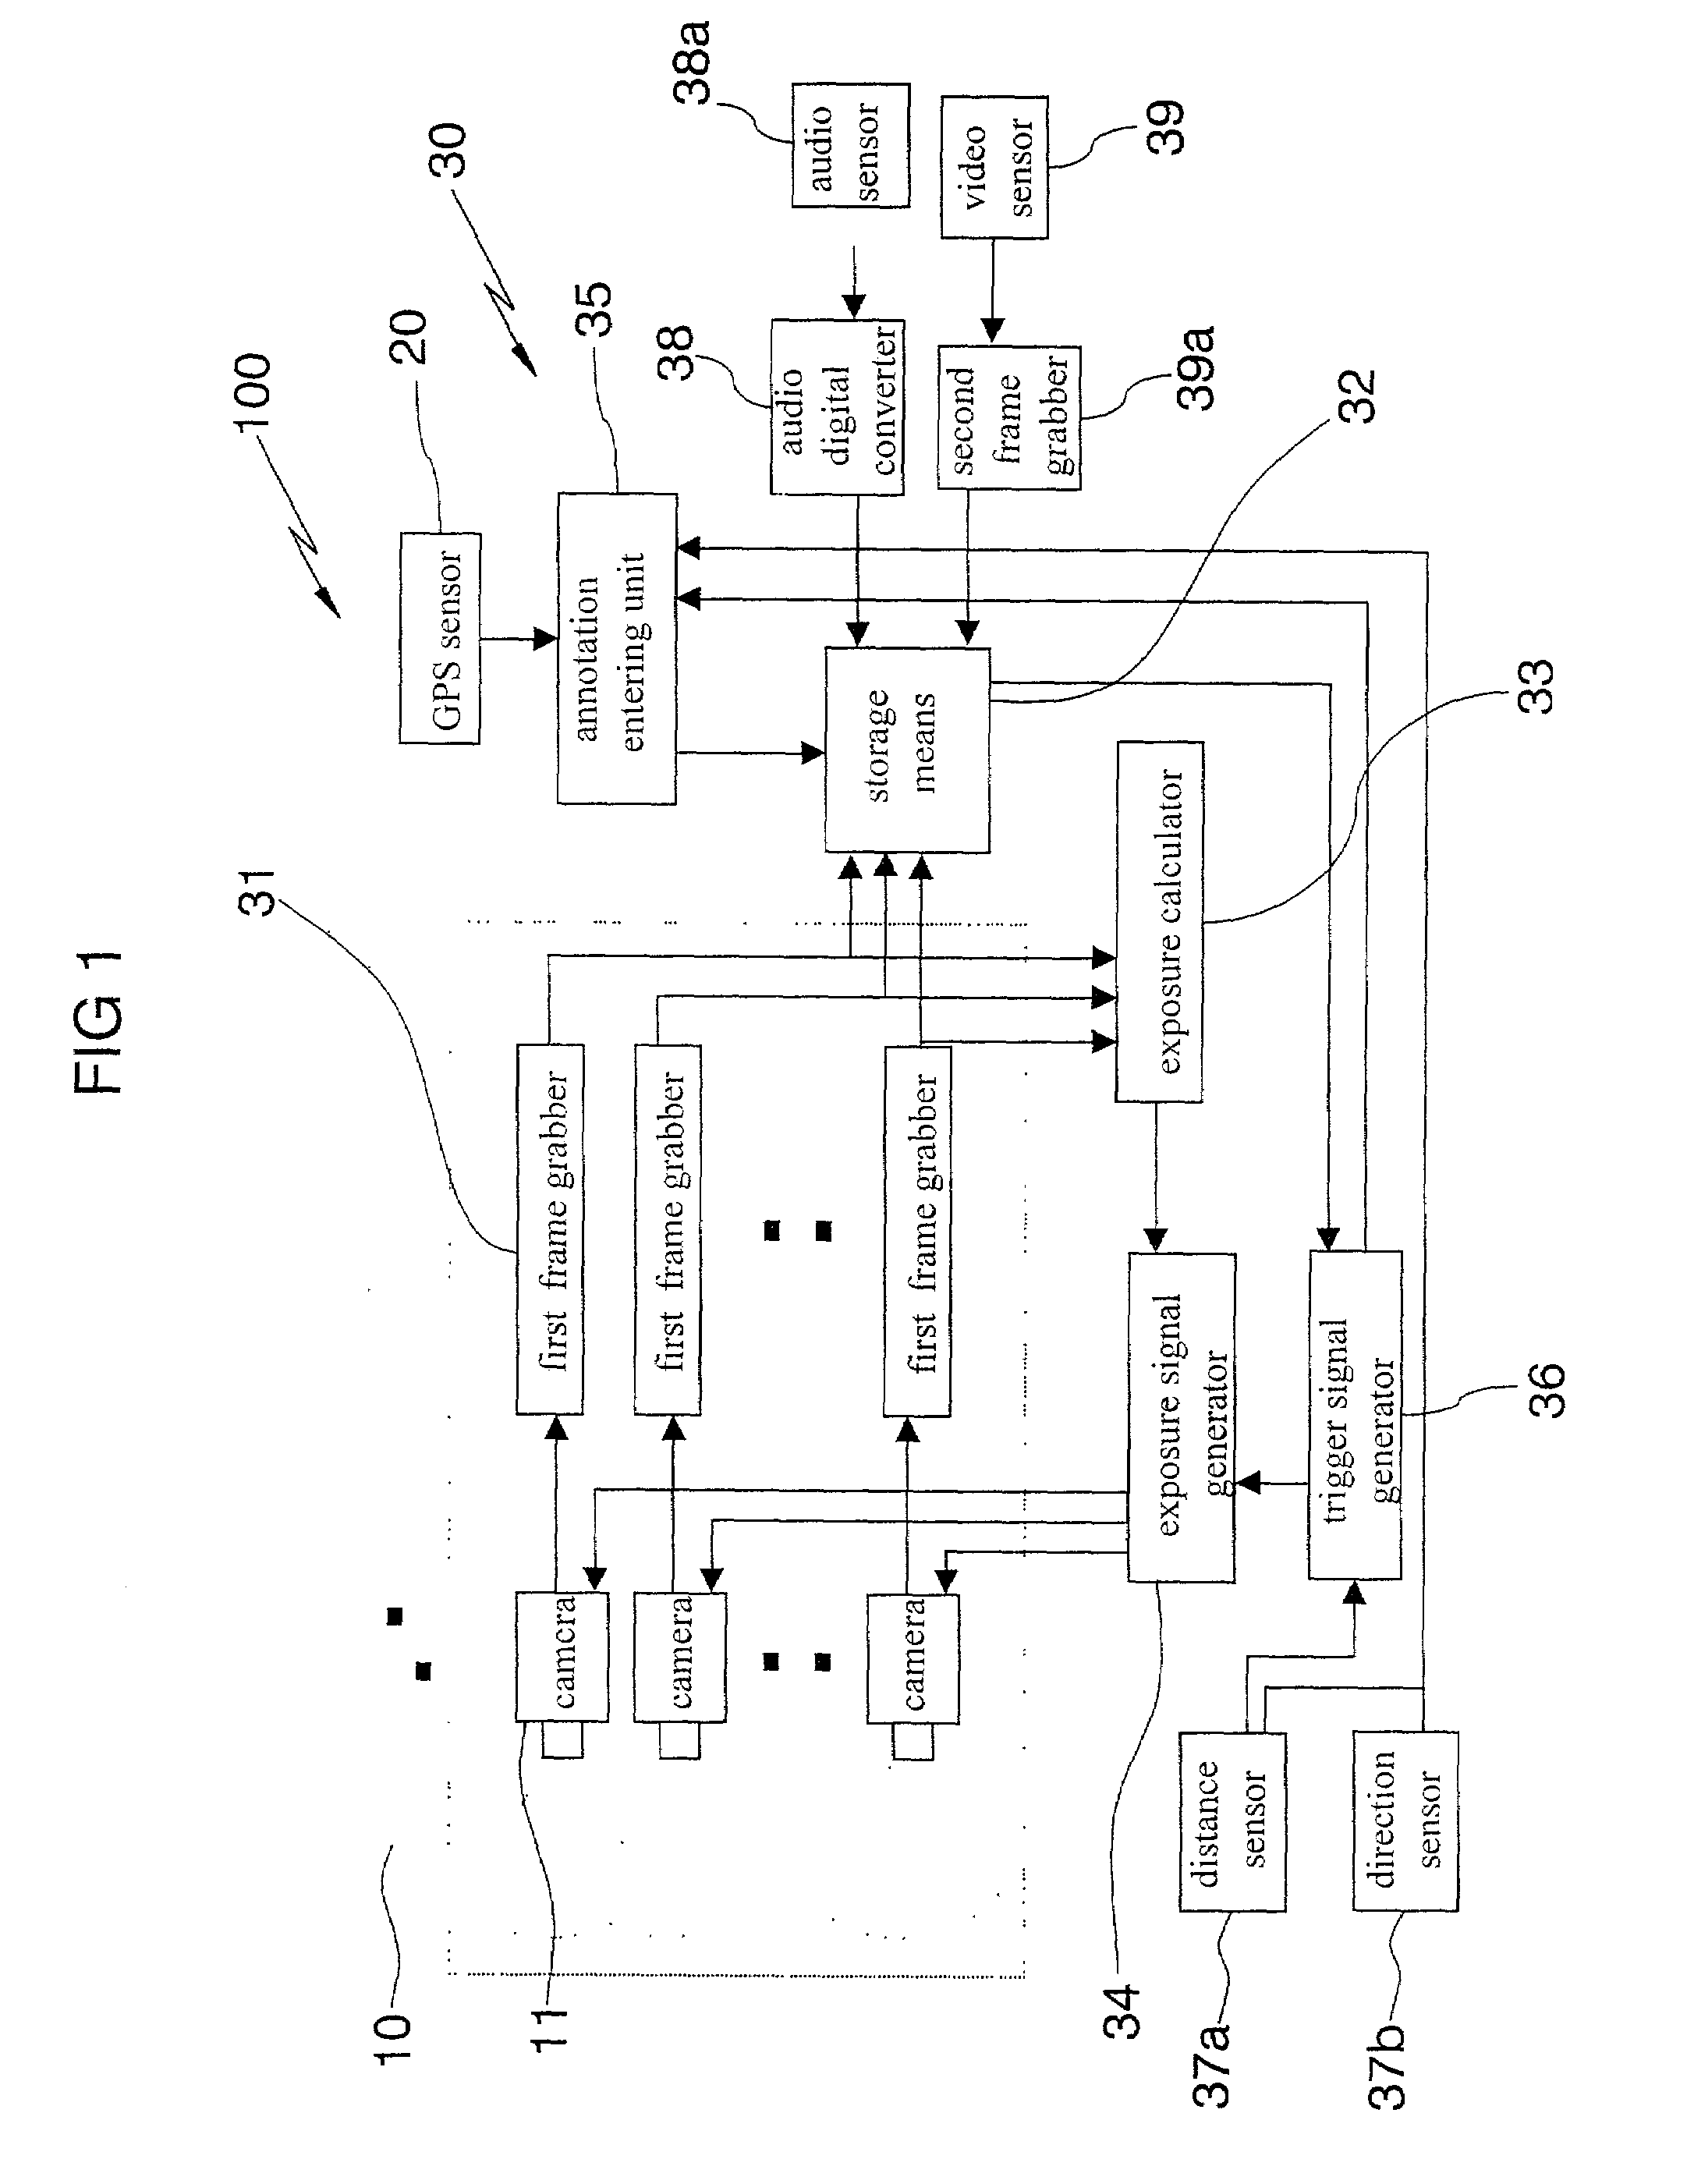 Method and apparatus for omni-directional image and 3-dimensional data acquisition with data annotation and dynamic range extension method